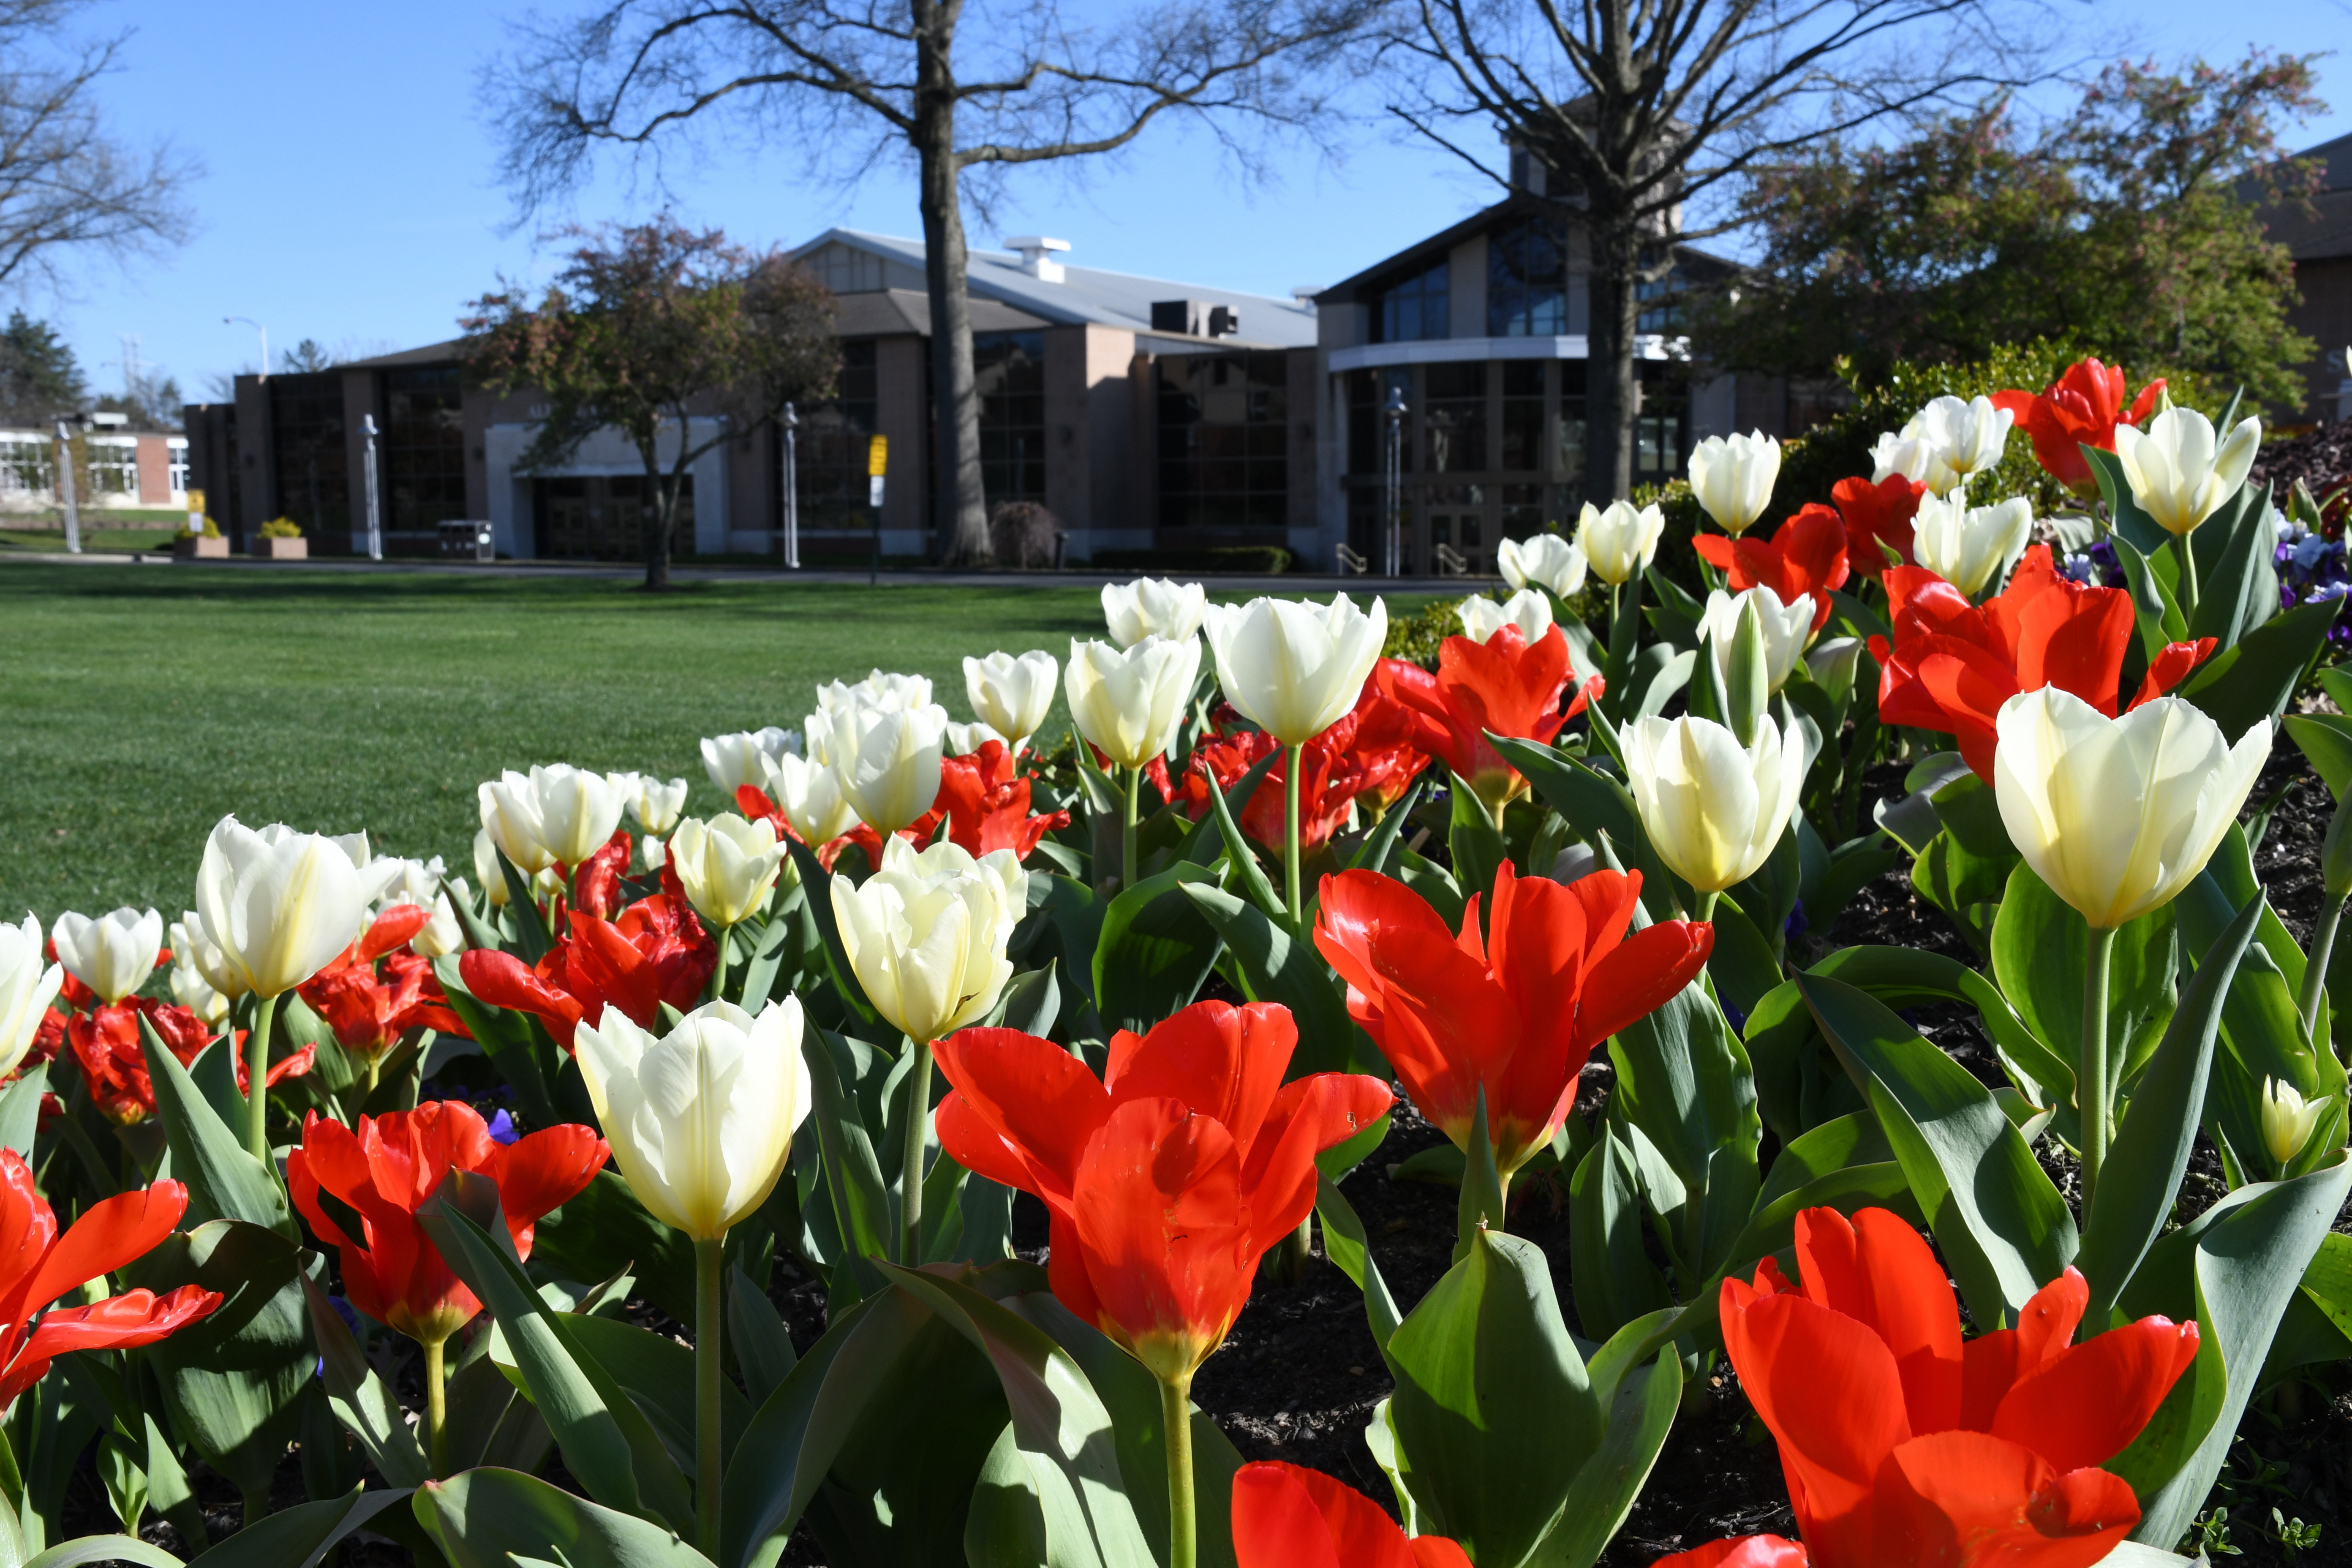 Tulips in bloom on campus